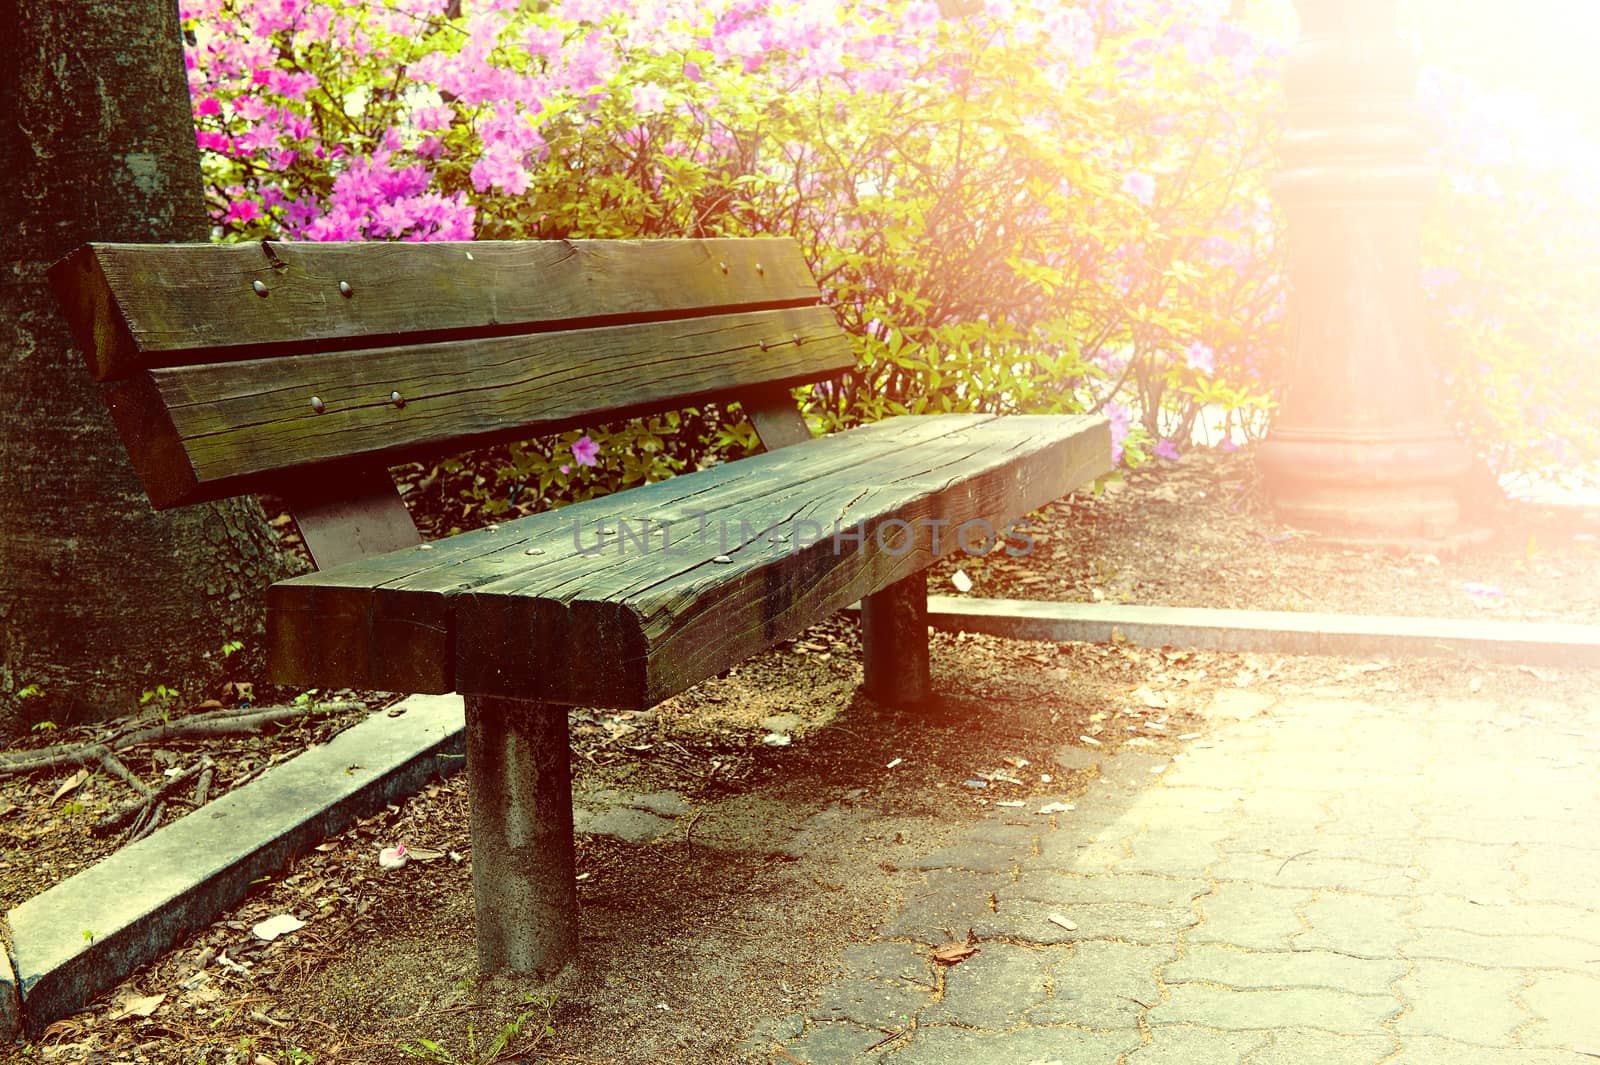 Wooden bench in park with vintage color.